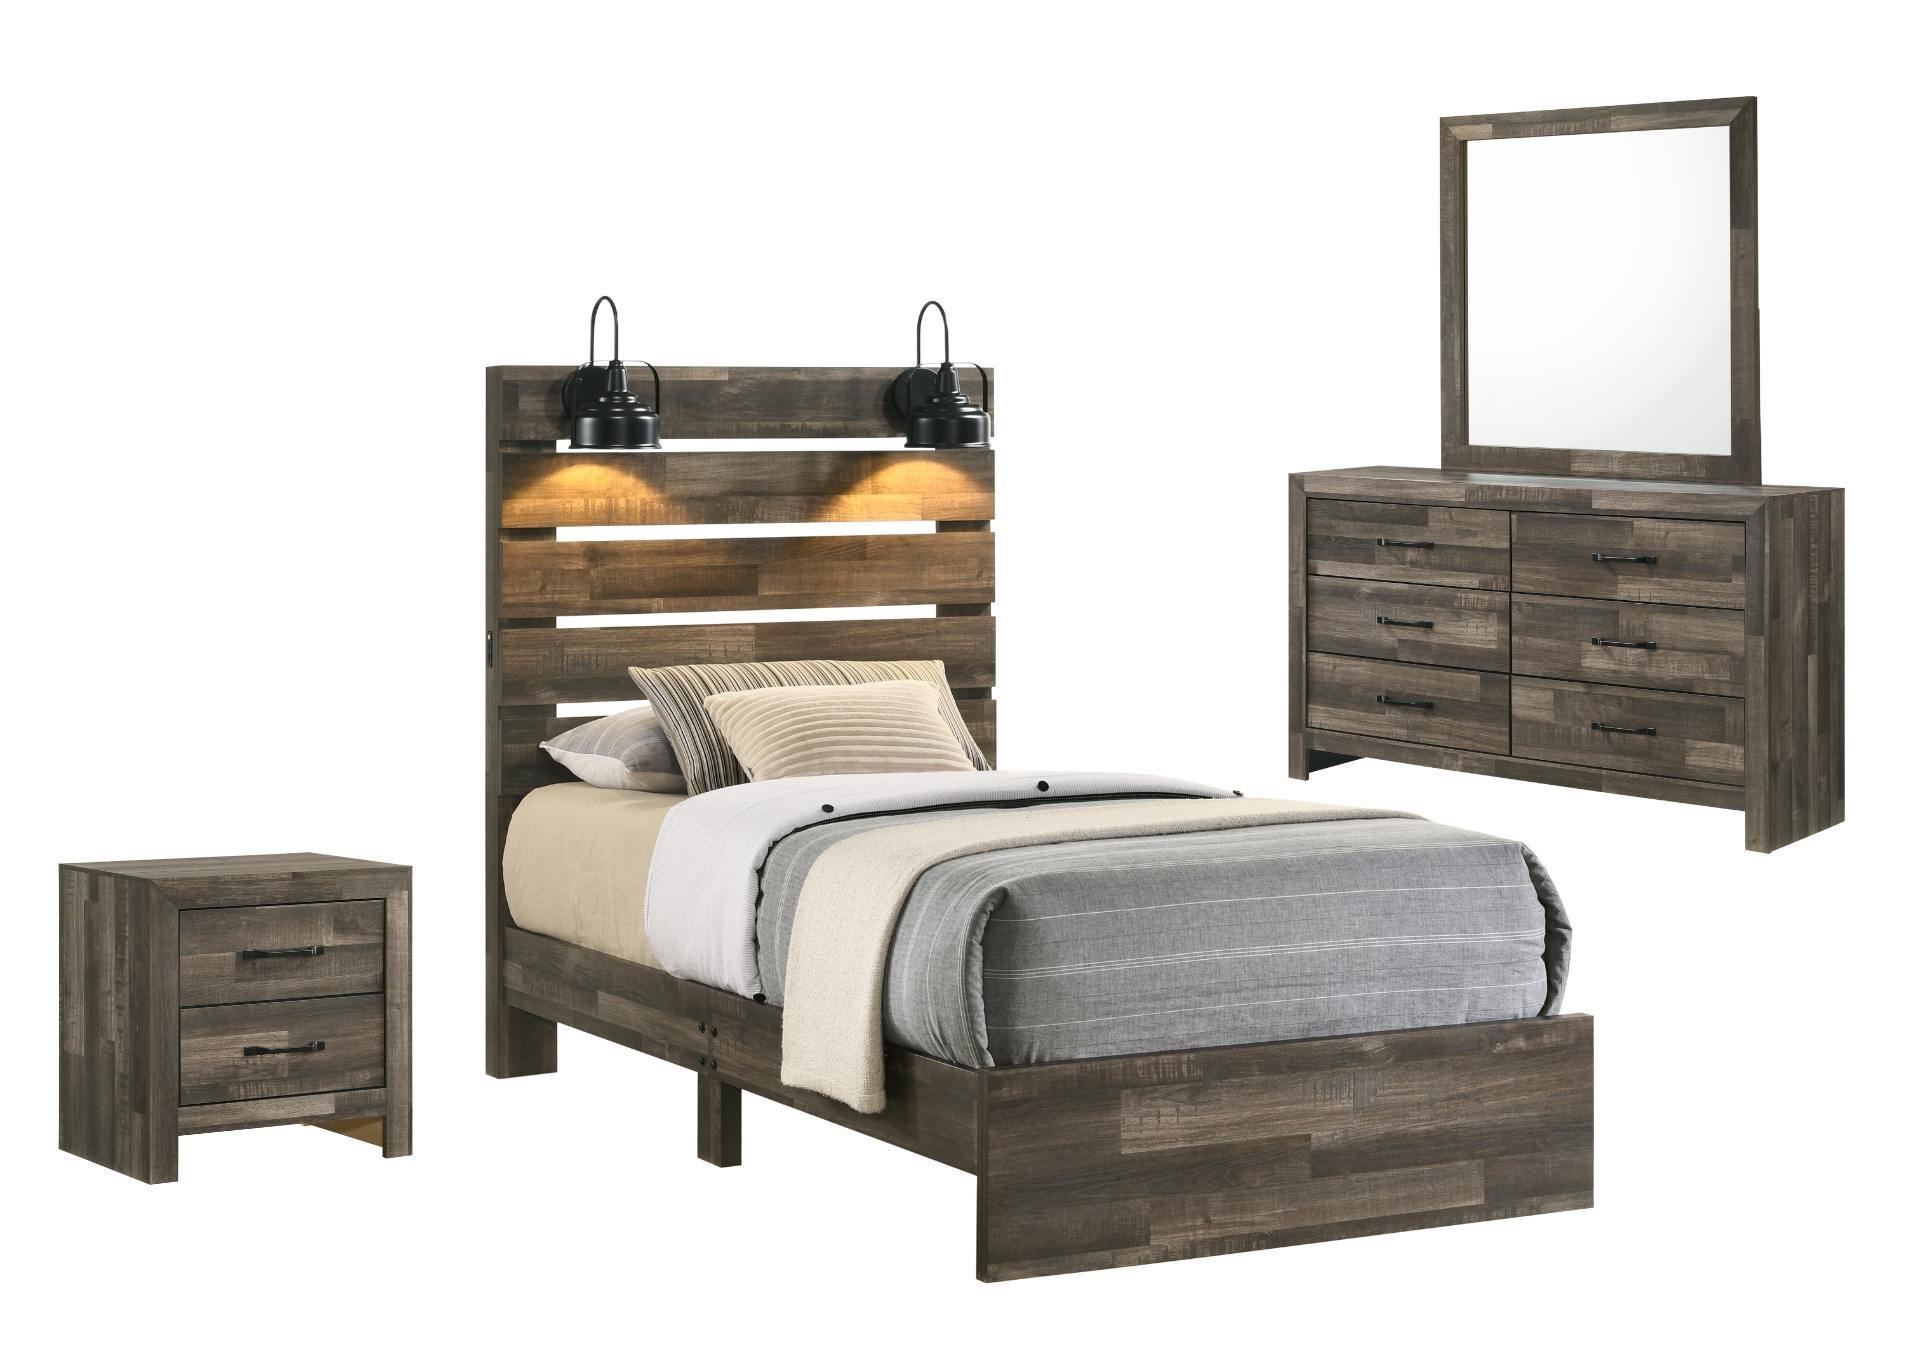 ARIANNA BROWN TWIN BEDROOM WITH LIGHTS,LIFESTYLE FURNITURE